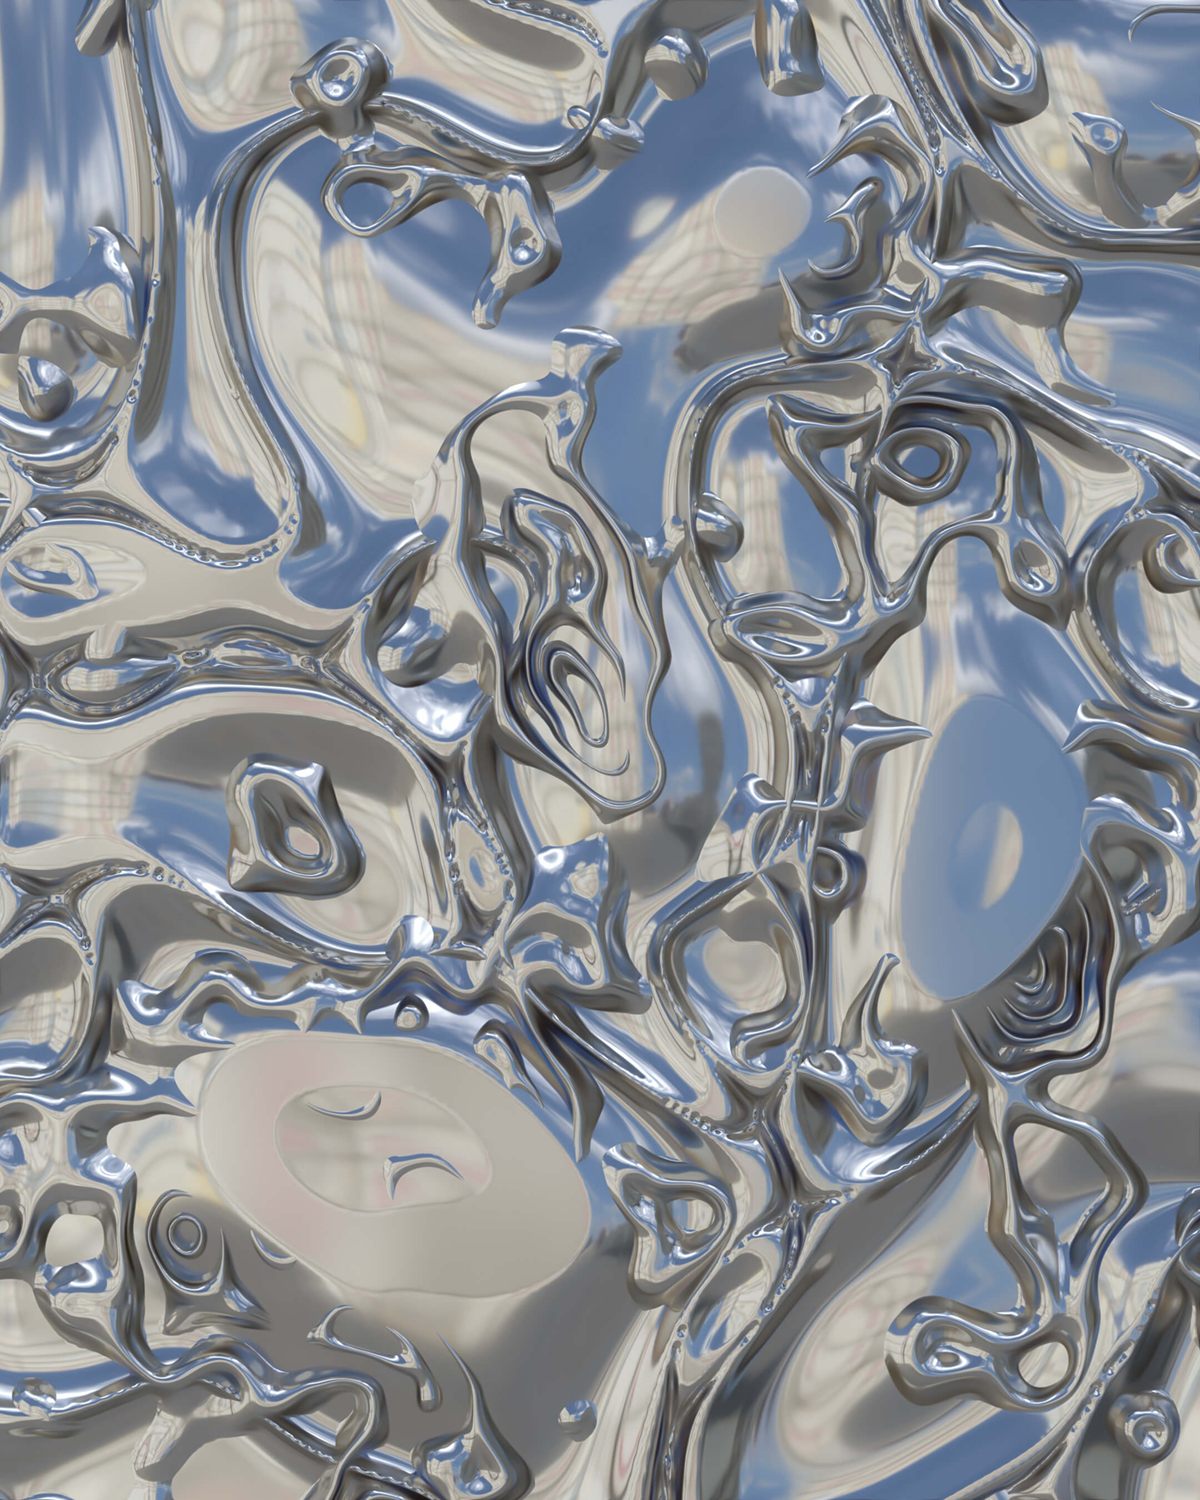 Abstract image featuring a fluid, reflective pattern with silver and gray tones, creating a metallic texture that mimics the appearance of molten metal with light and shadow interplay